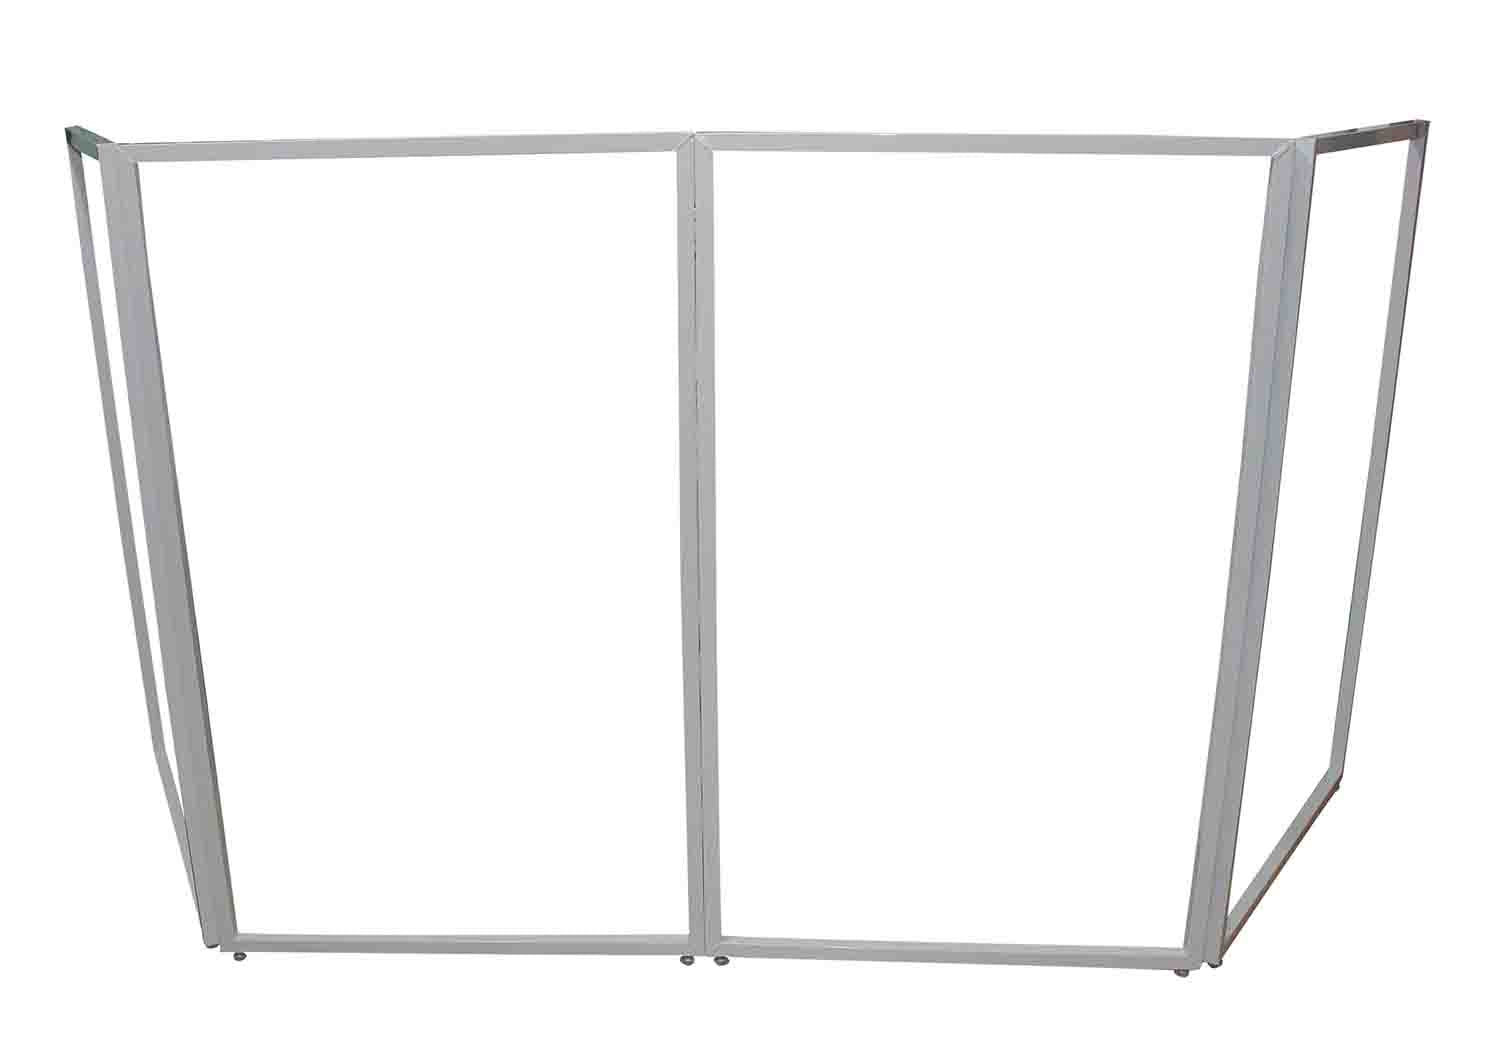 ProX XF-4X3048W MK2 Four Panel Collapse and Go DJ Facade With White Frame and Carry Bag - Black and White Scrims - Hollywood DJ